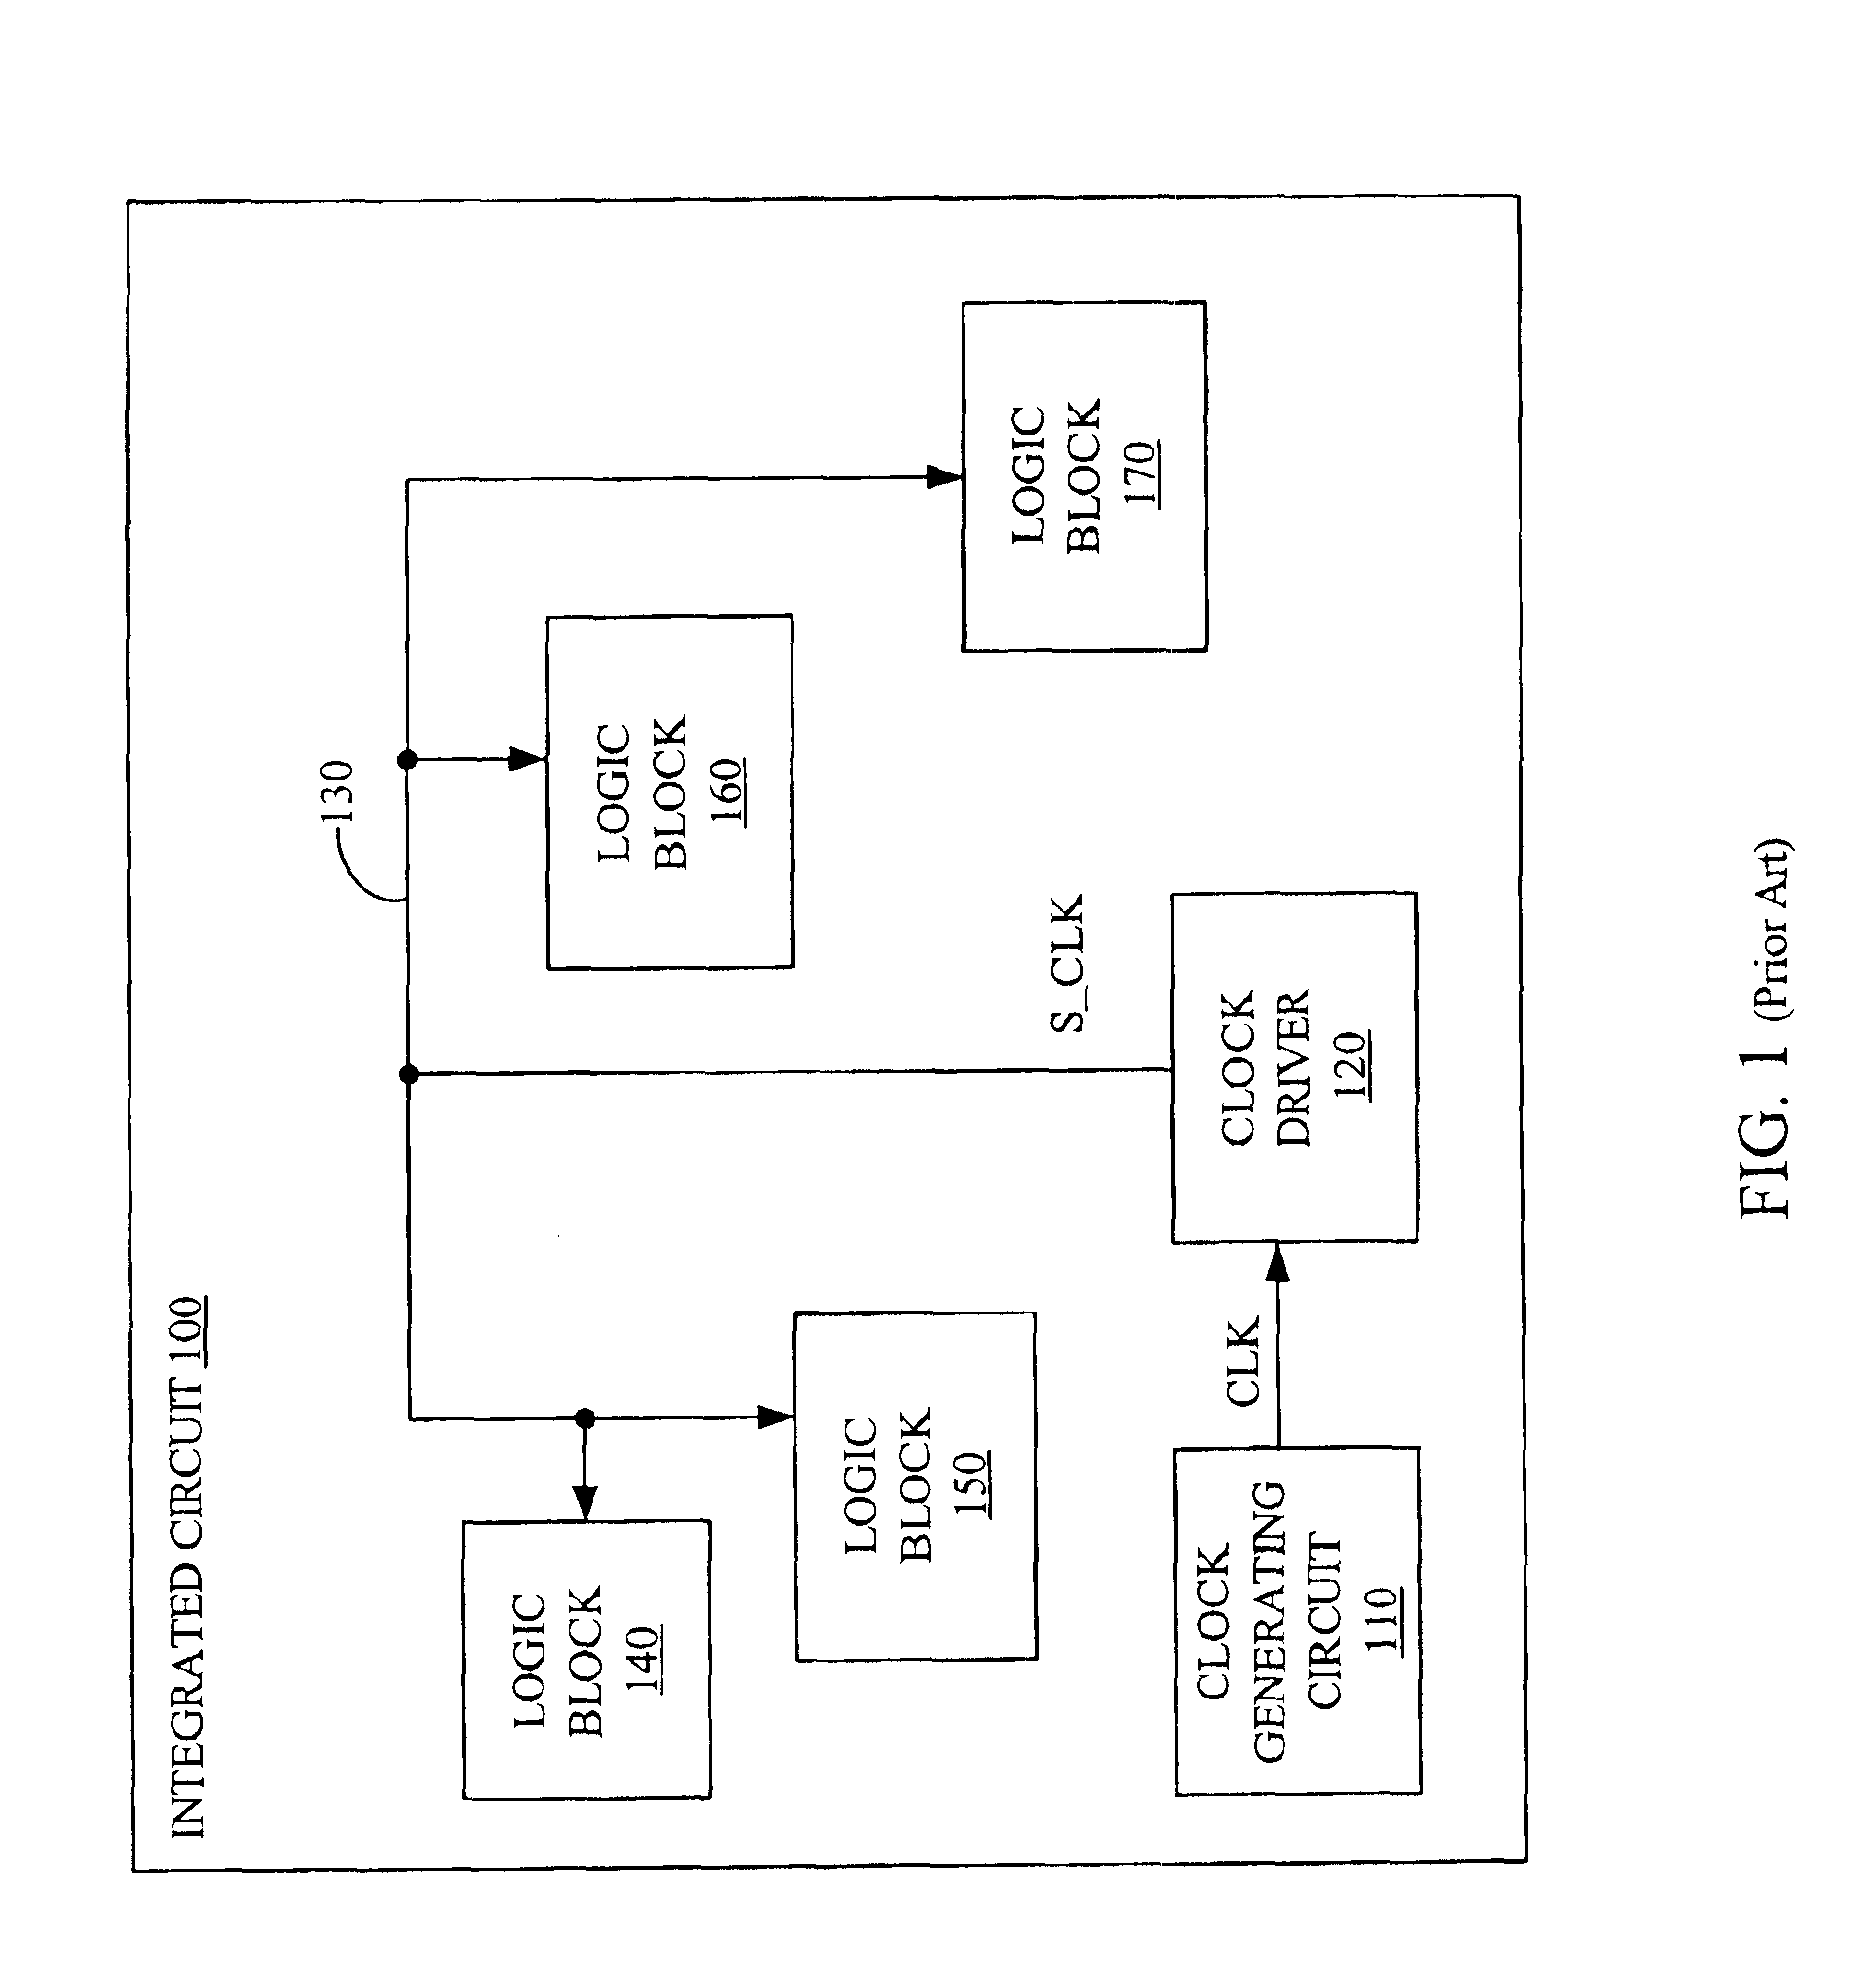 Tunable clock distribution system for reducing power dissipation